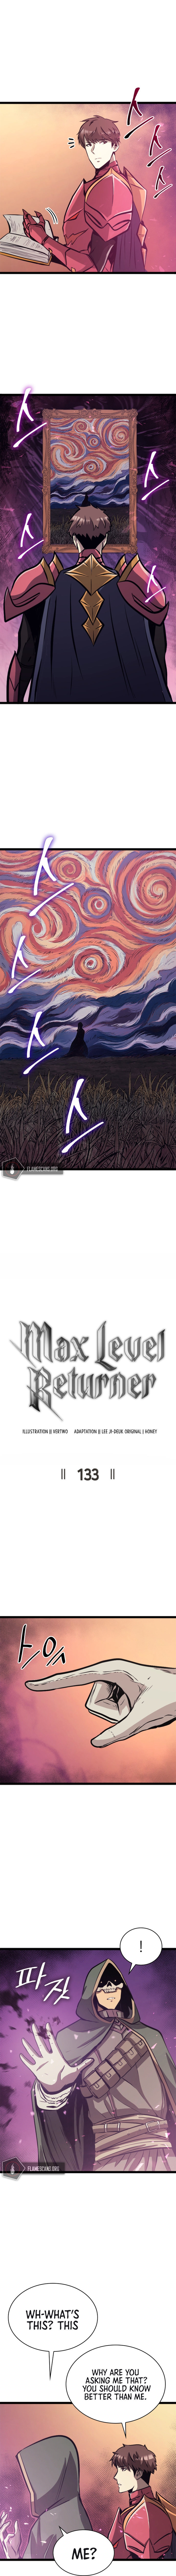 Max Level Returner - Chapter 133 Page 3